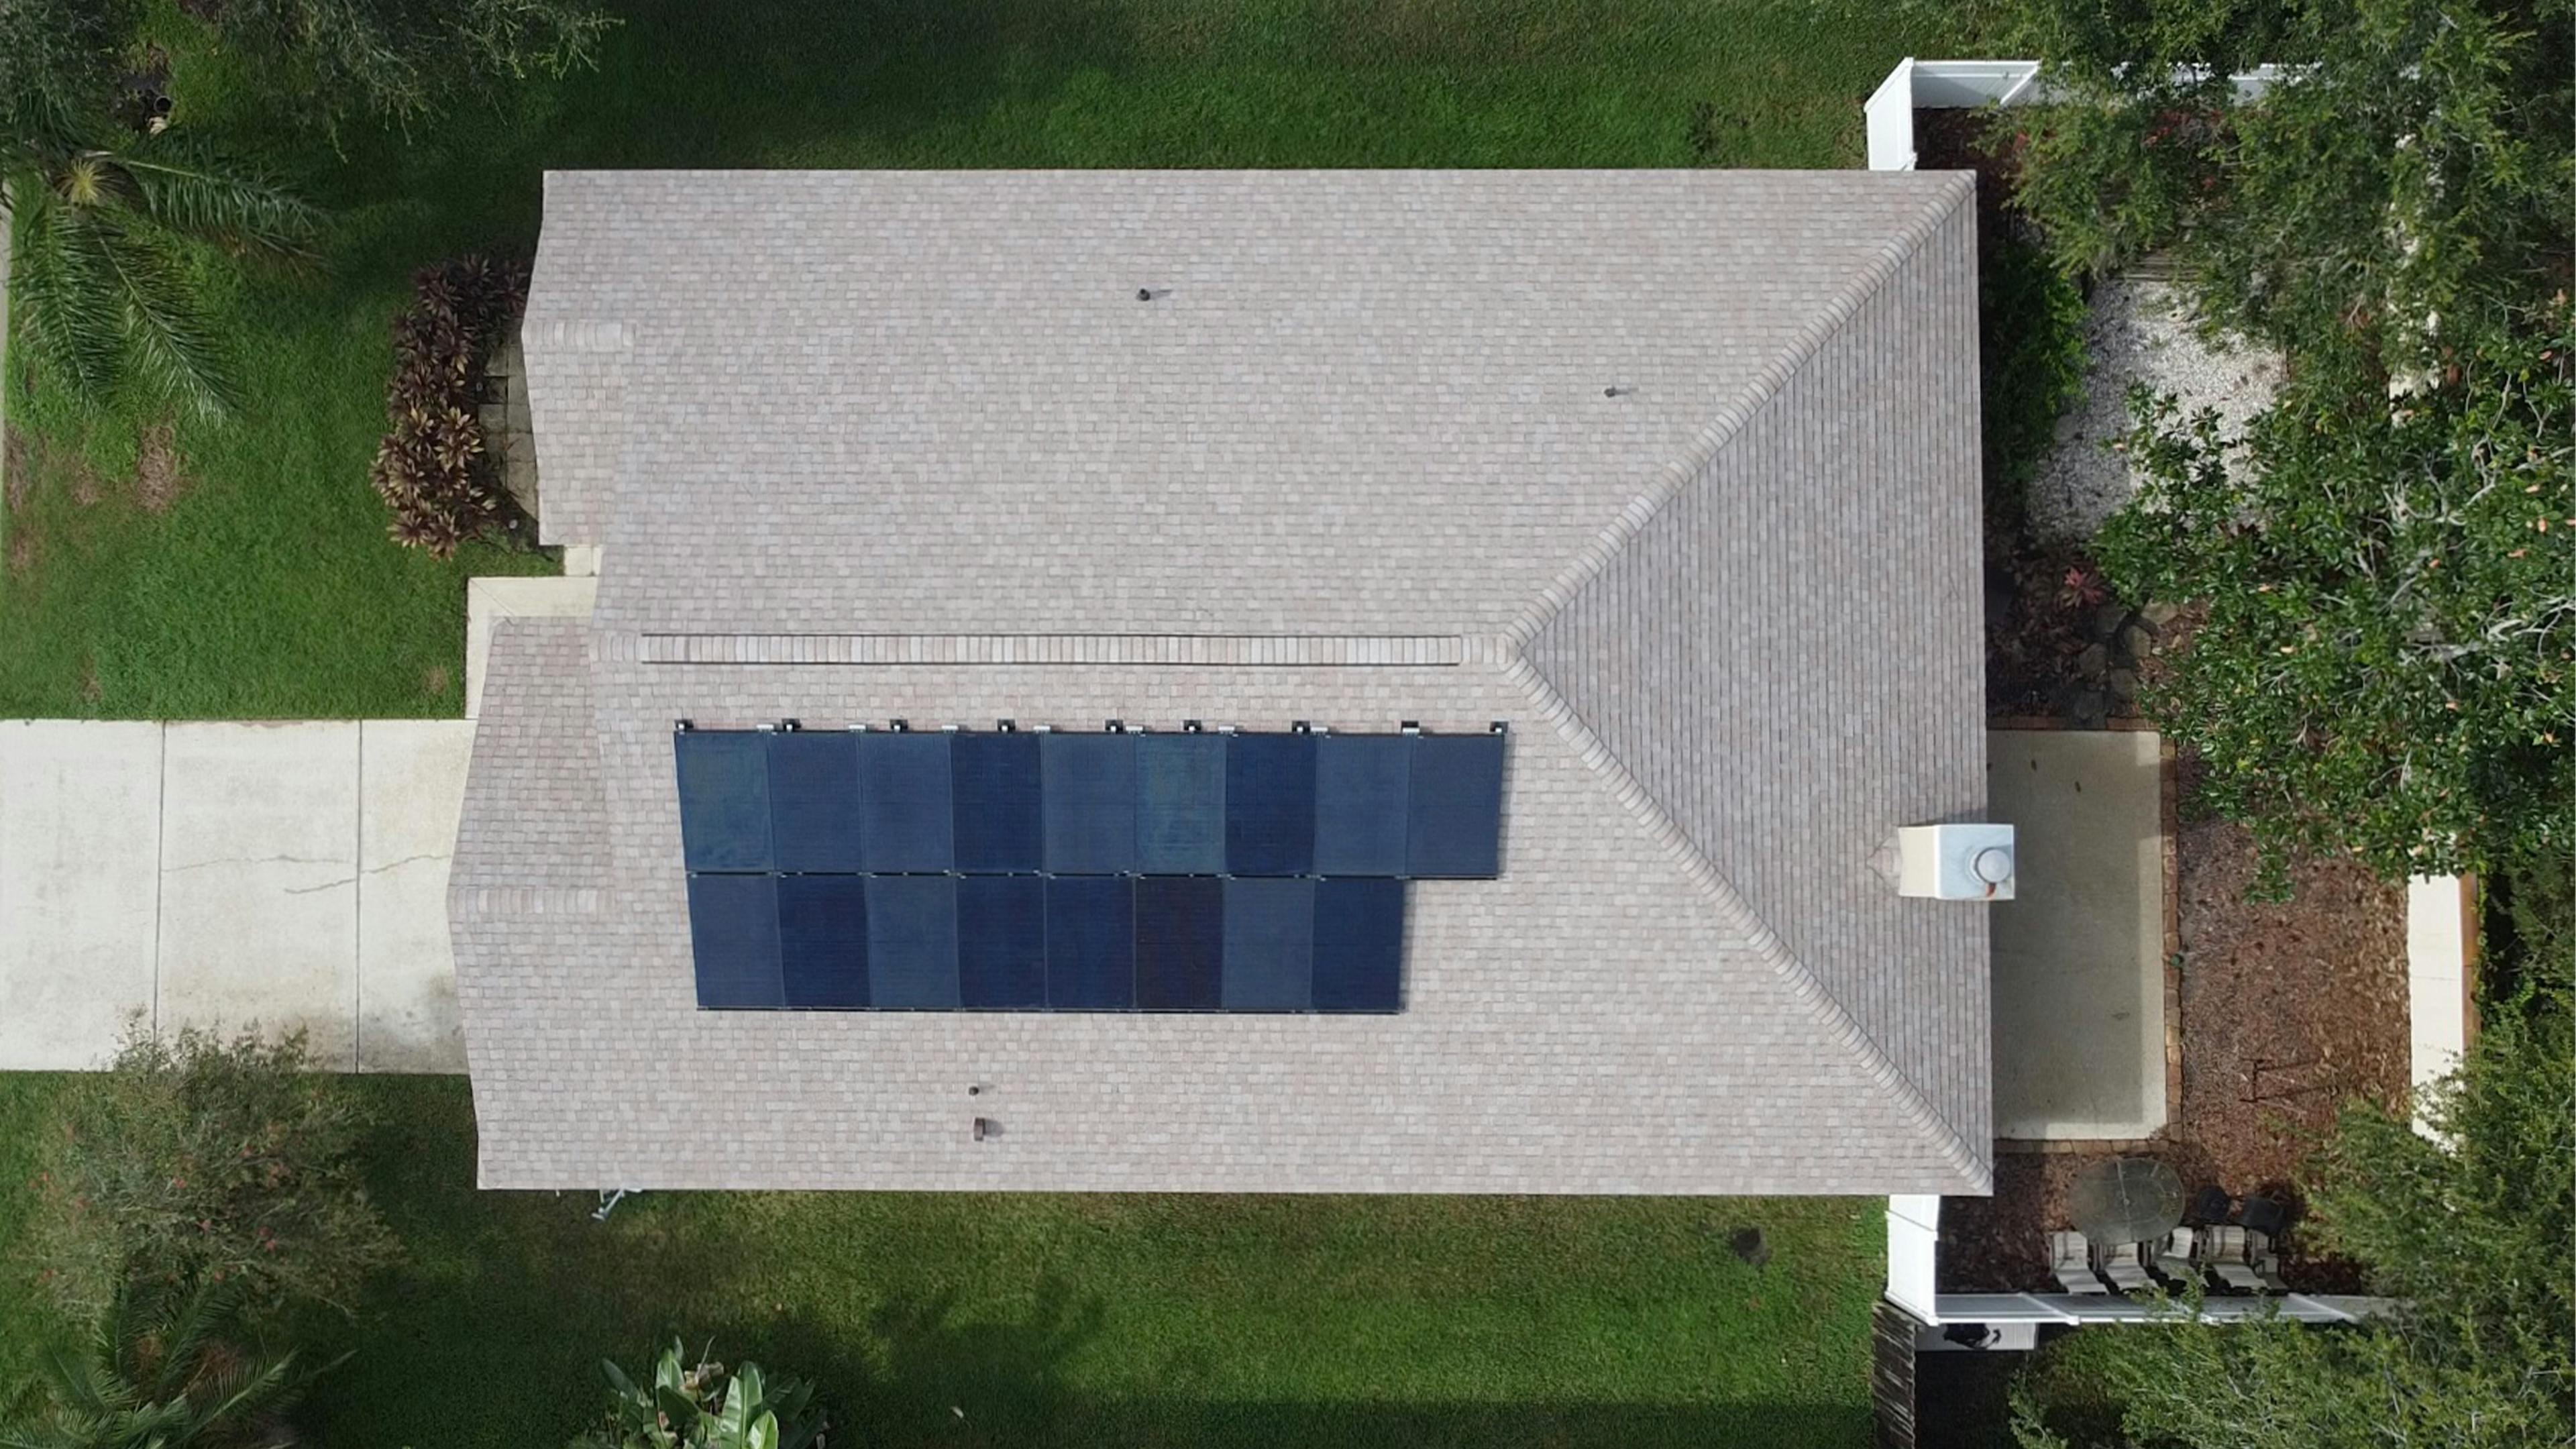 photo of a house with solar panels